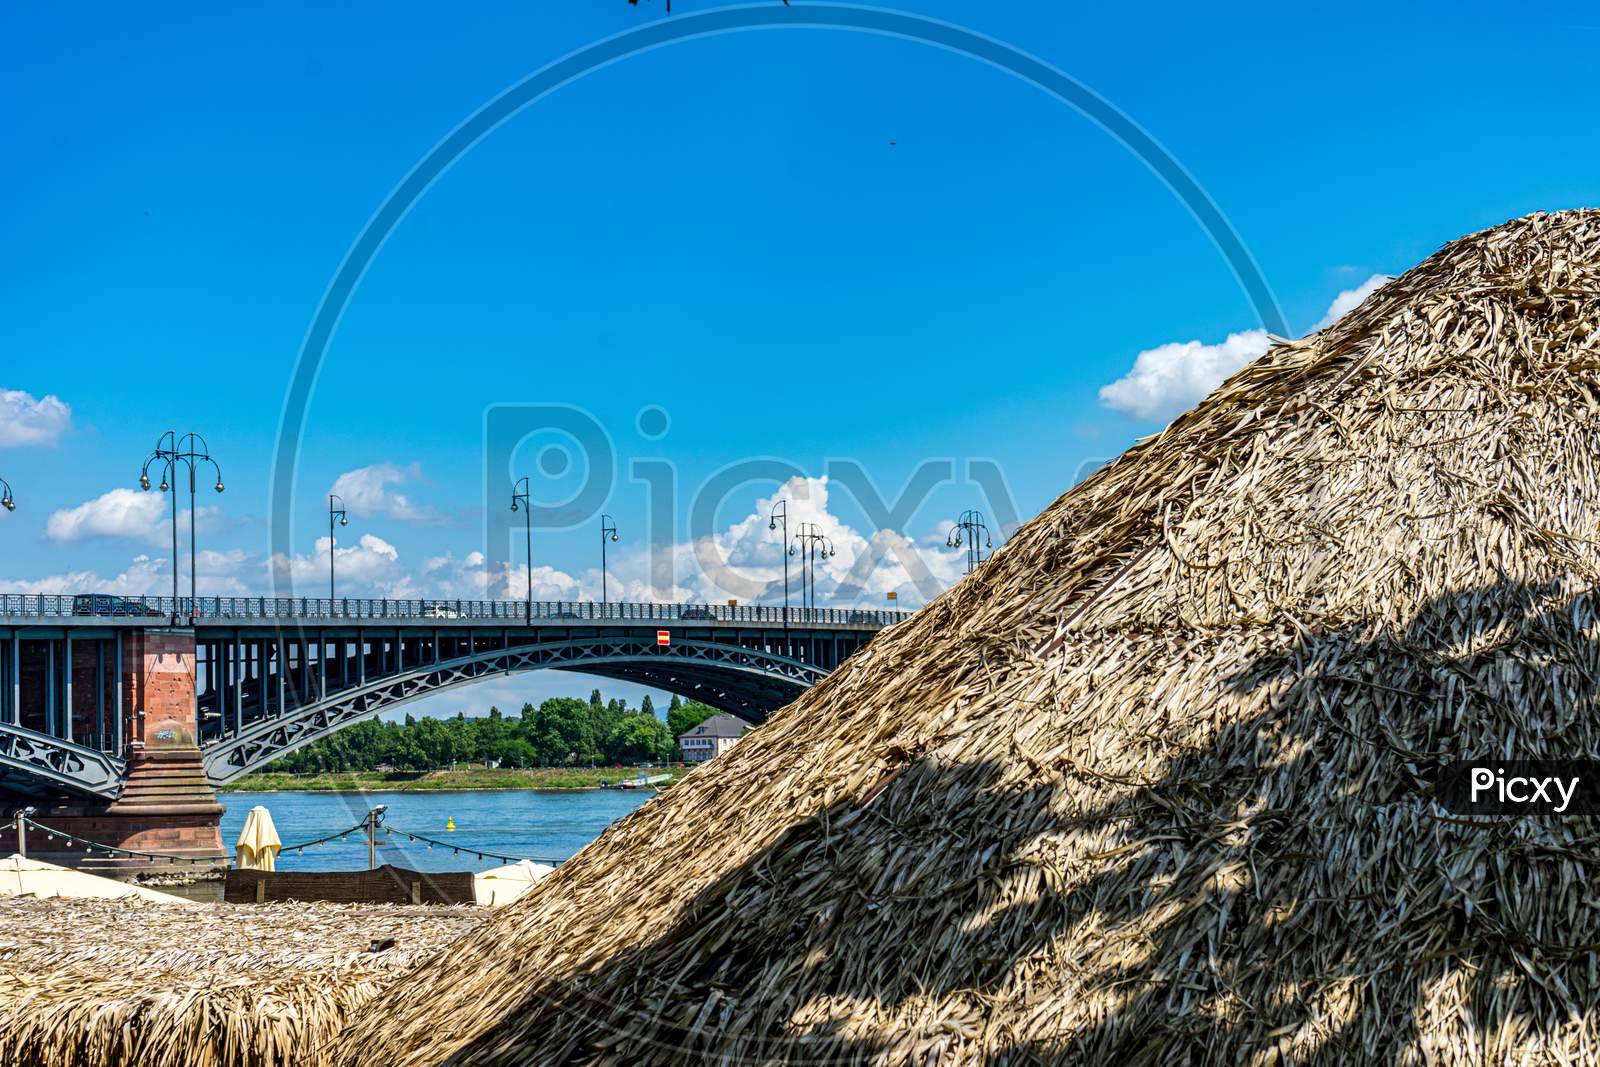 Germany, Heritage Site Mainz, A Bridge Over A Body Of Water